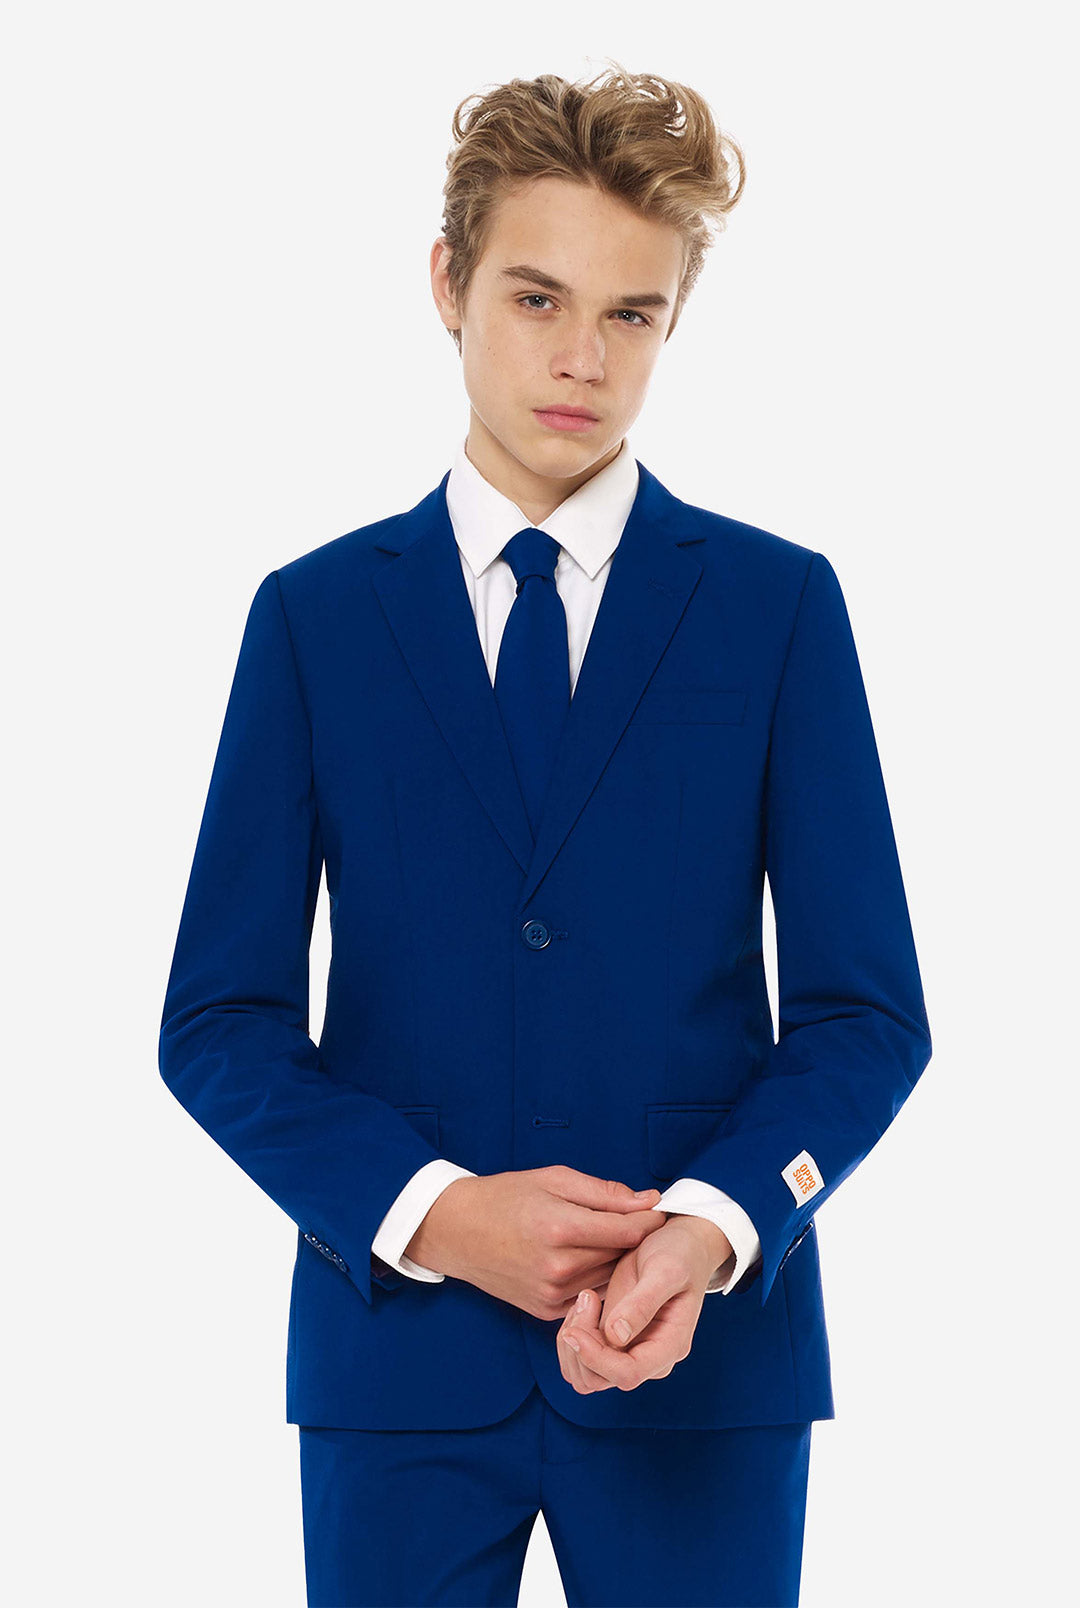 Navy Royale, Navy Blue Suit For Teen Boys, Teens' suit